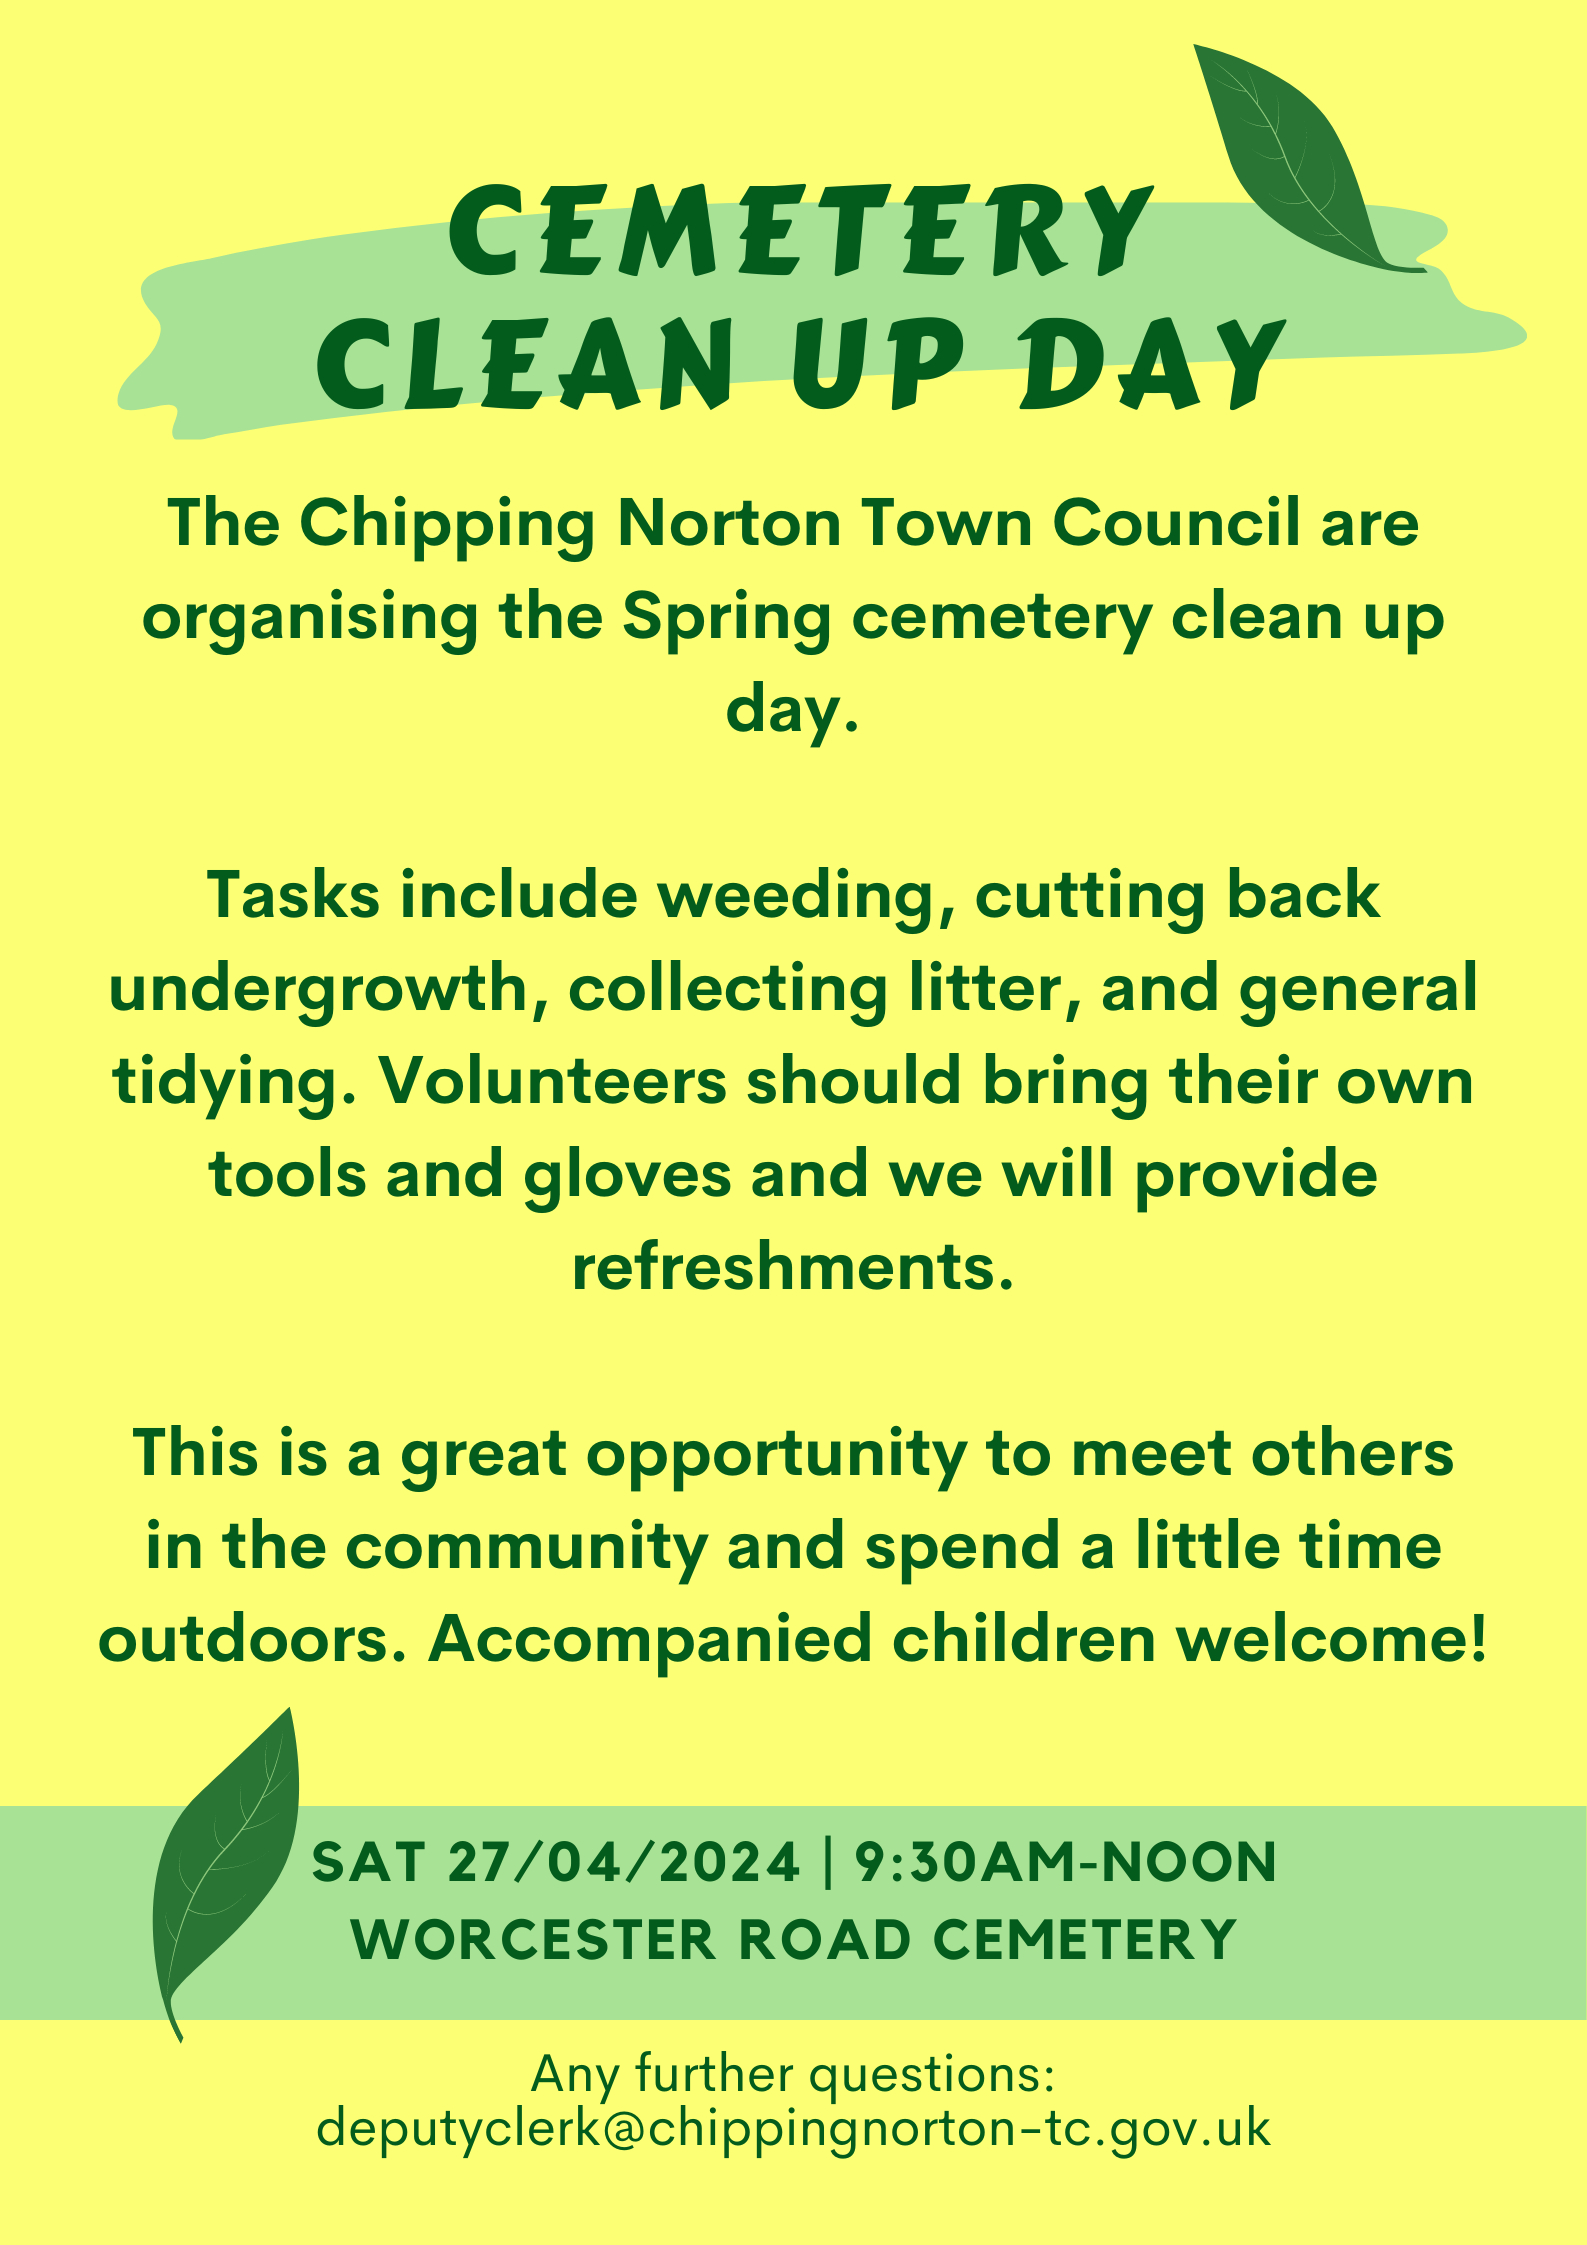 Chipping Norton Town Council are organising the spring cemetery clean up day. Tasks include weeding, cutting back, collecting litter, and general tidying. Volunteers should bring their own tools and gloves, and we will provide refreshments. 
This is a great opportunity to meet others in the community and spend a little time outdoors. Accompanied children welcome.
27th April 9:30am, Worcester Road Cemetery. 
Any questions: depurtclerk@chippingnorton-tc.gov.uk 